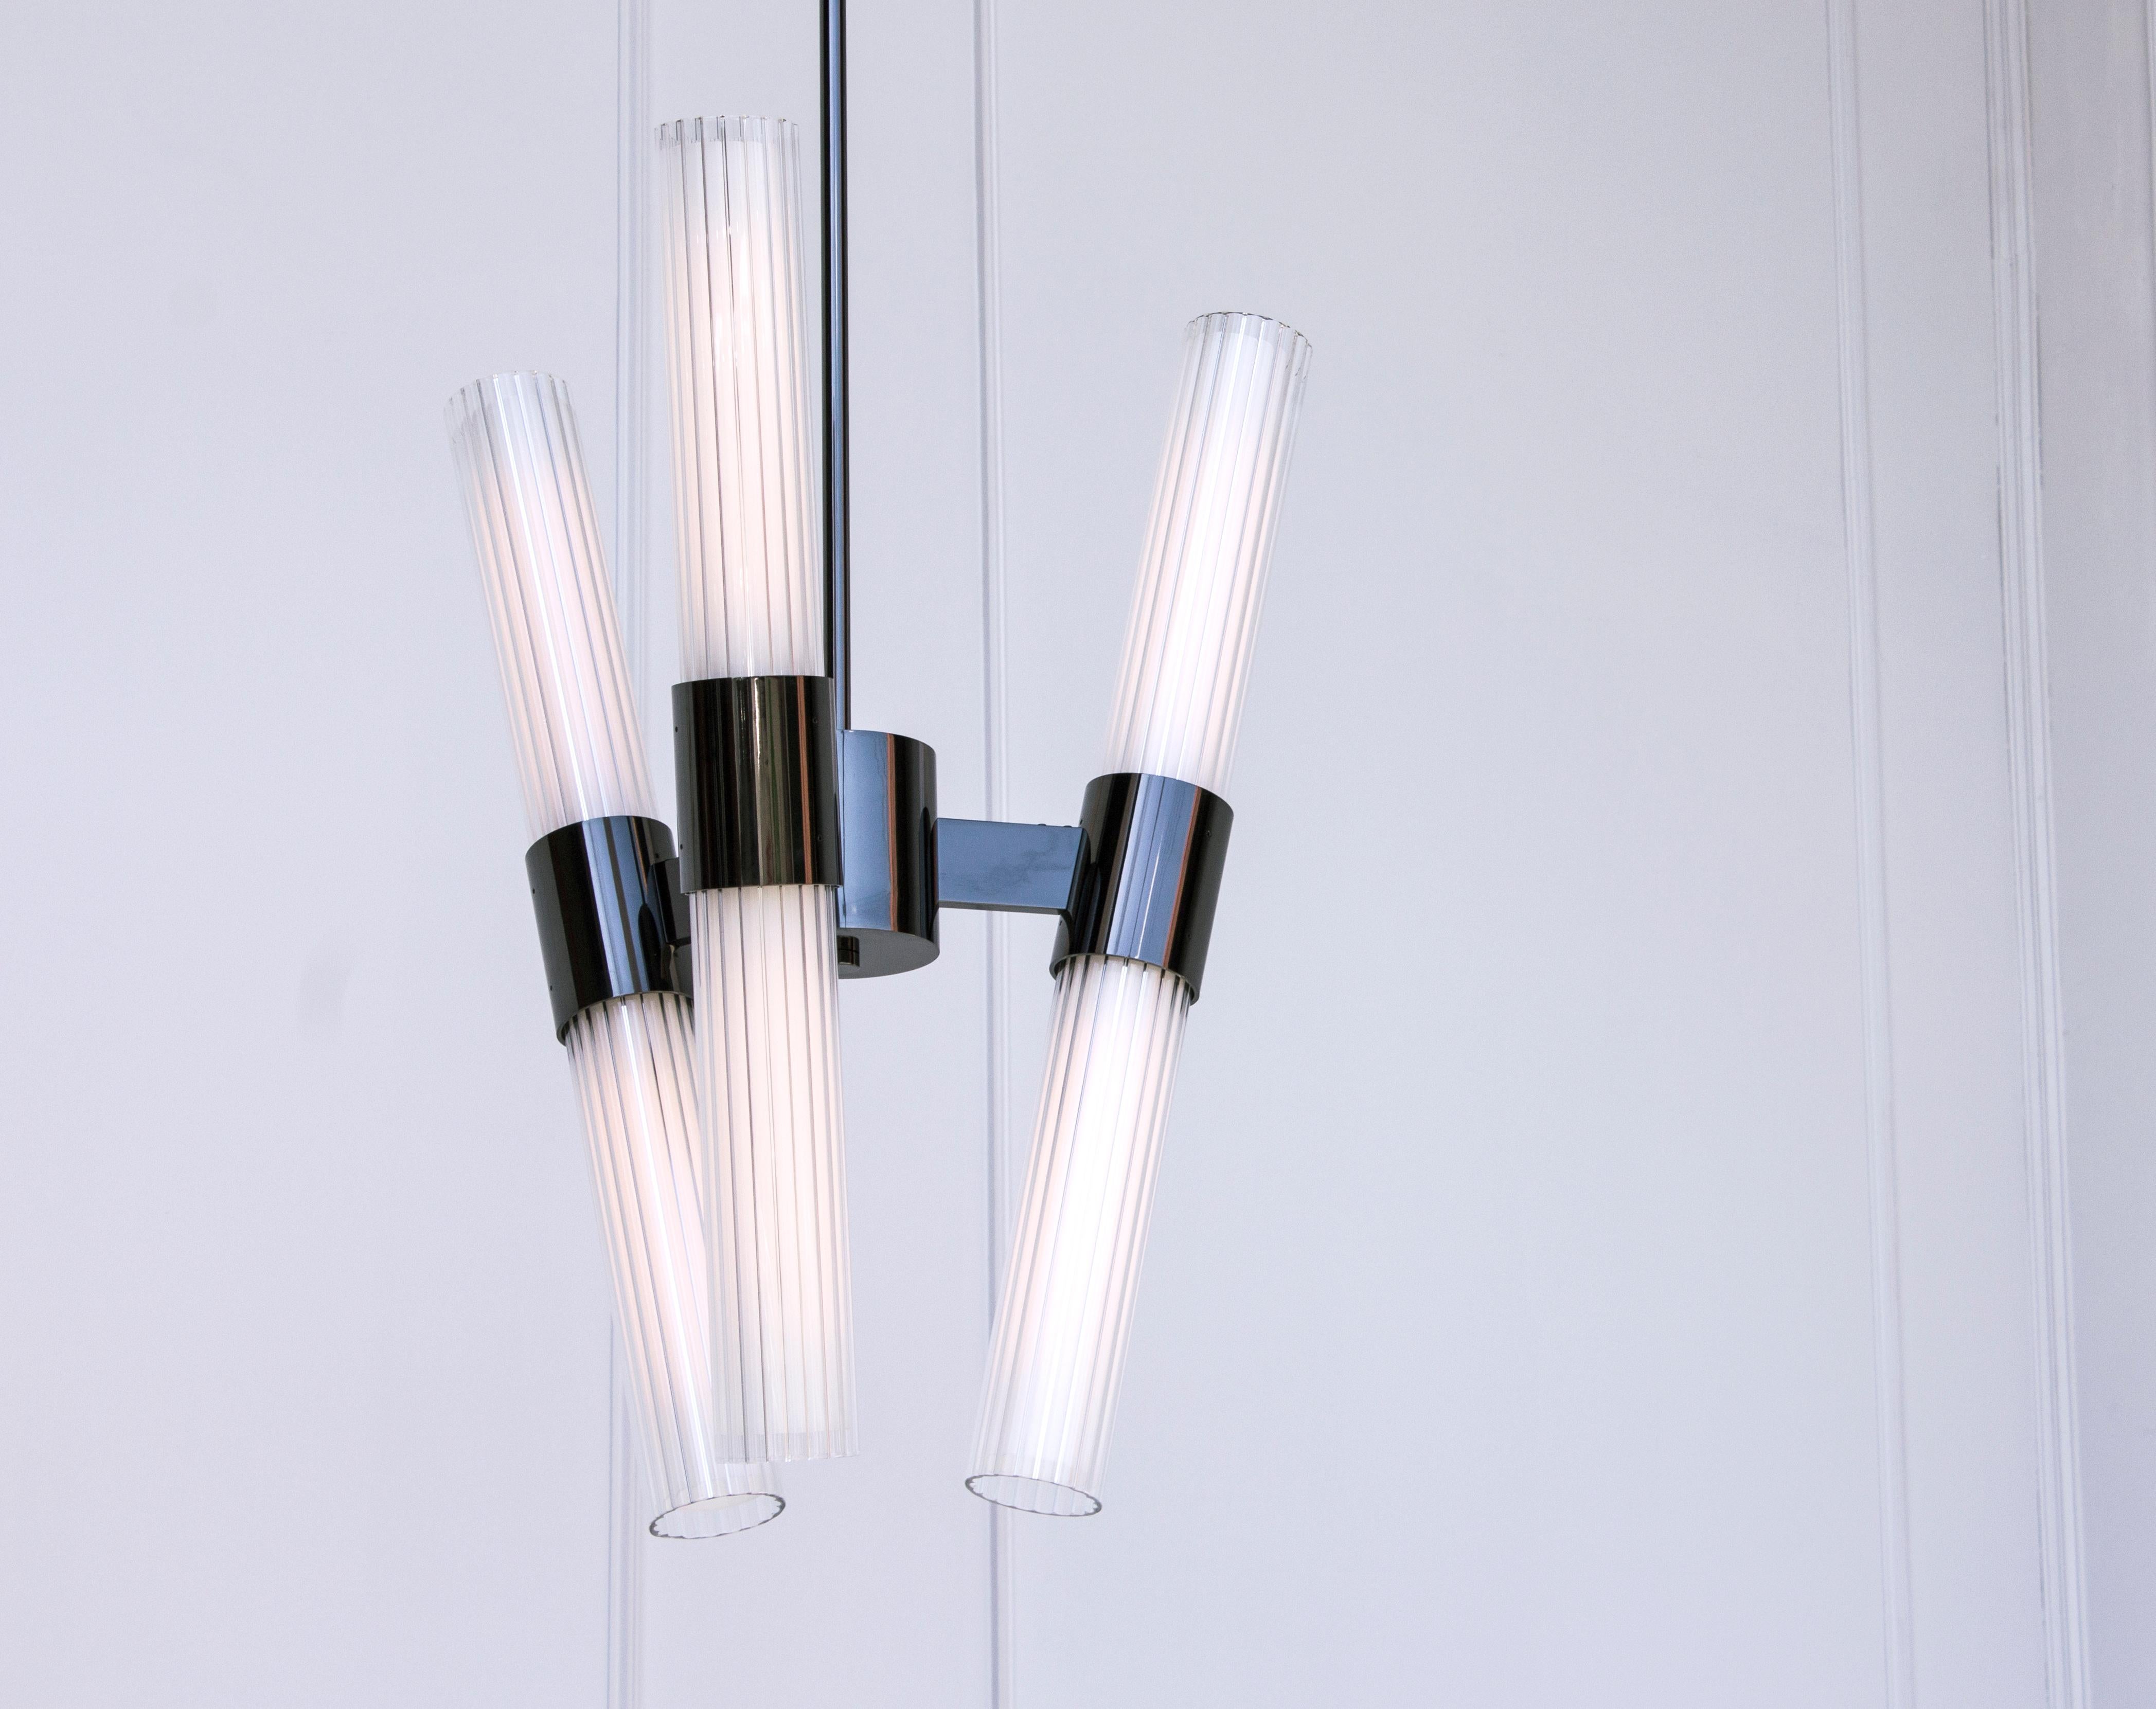 he Dixie series centers around a bold fluted glass light assembly. The chandelier puts this large scale detail on display in monumental fashion. Its modular design and production allow for a wide range of custom configurations built to